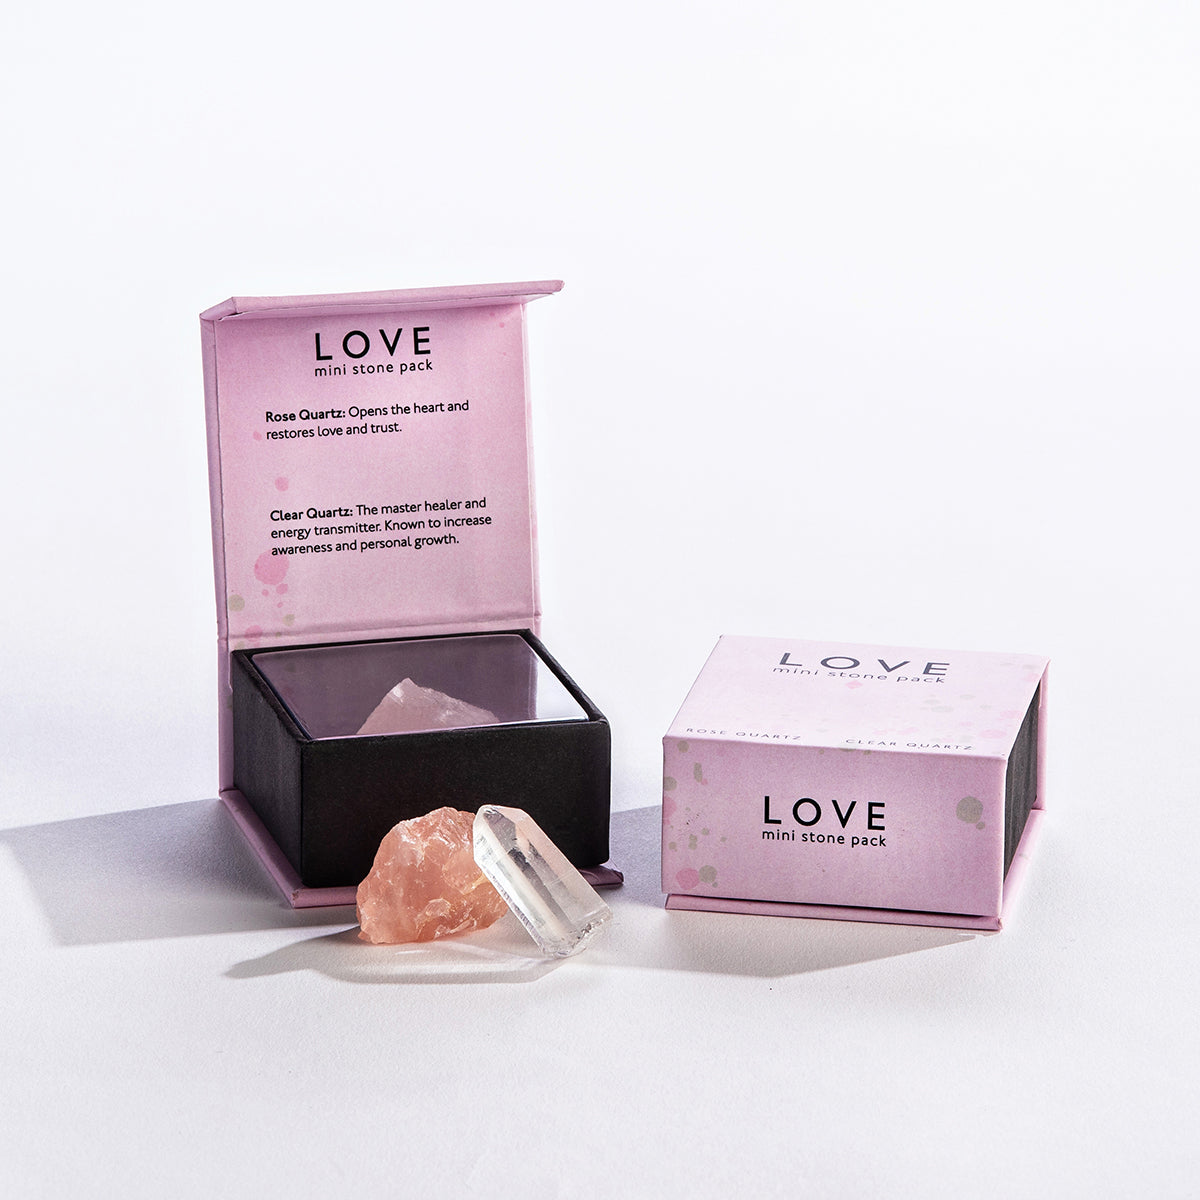 the love mini stones displayed next to the packages on a white background